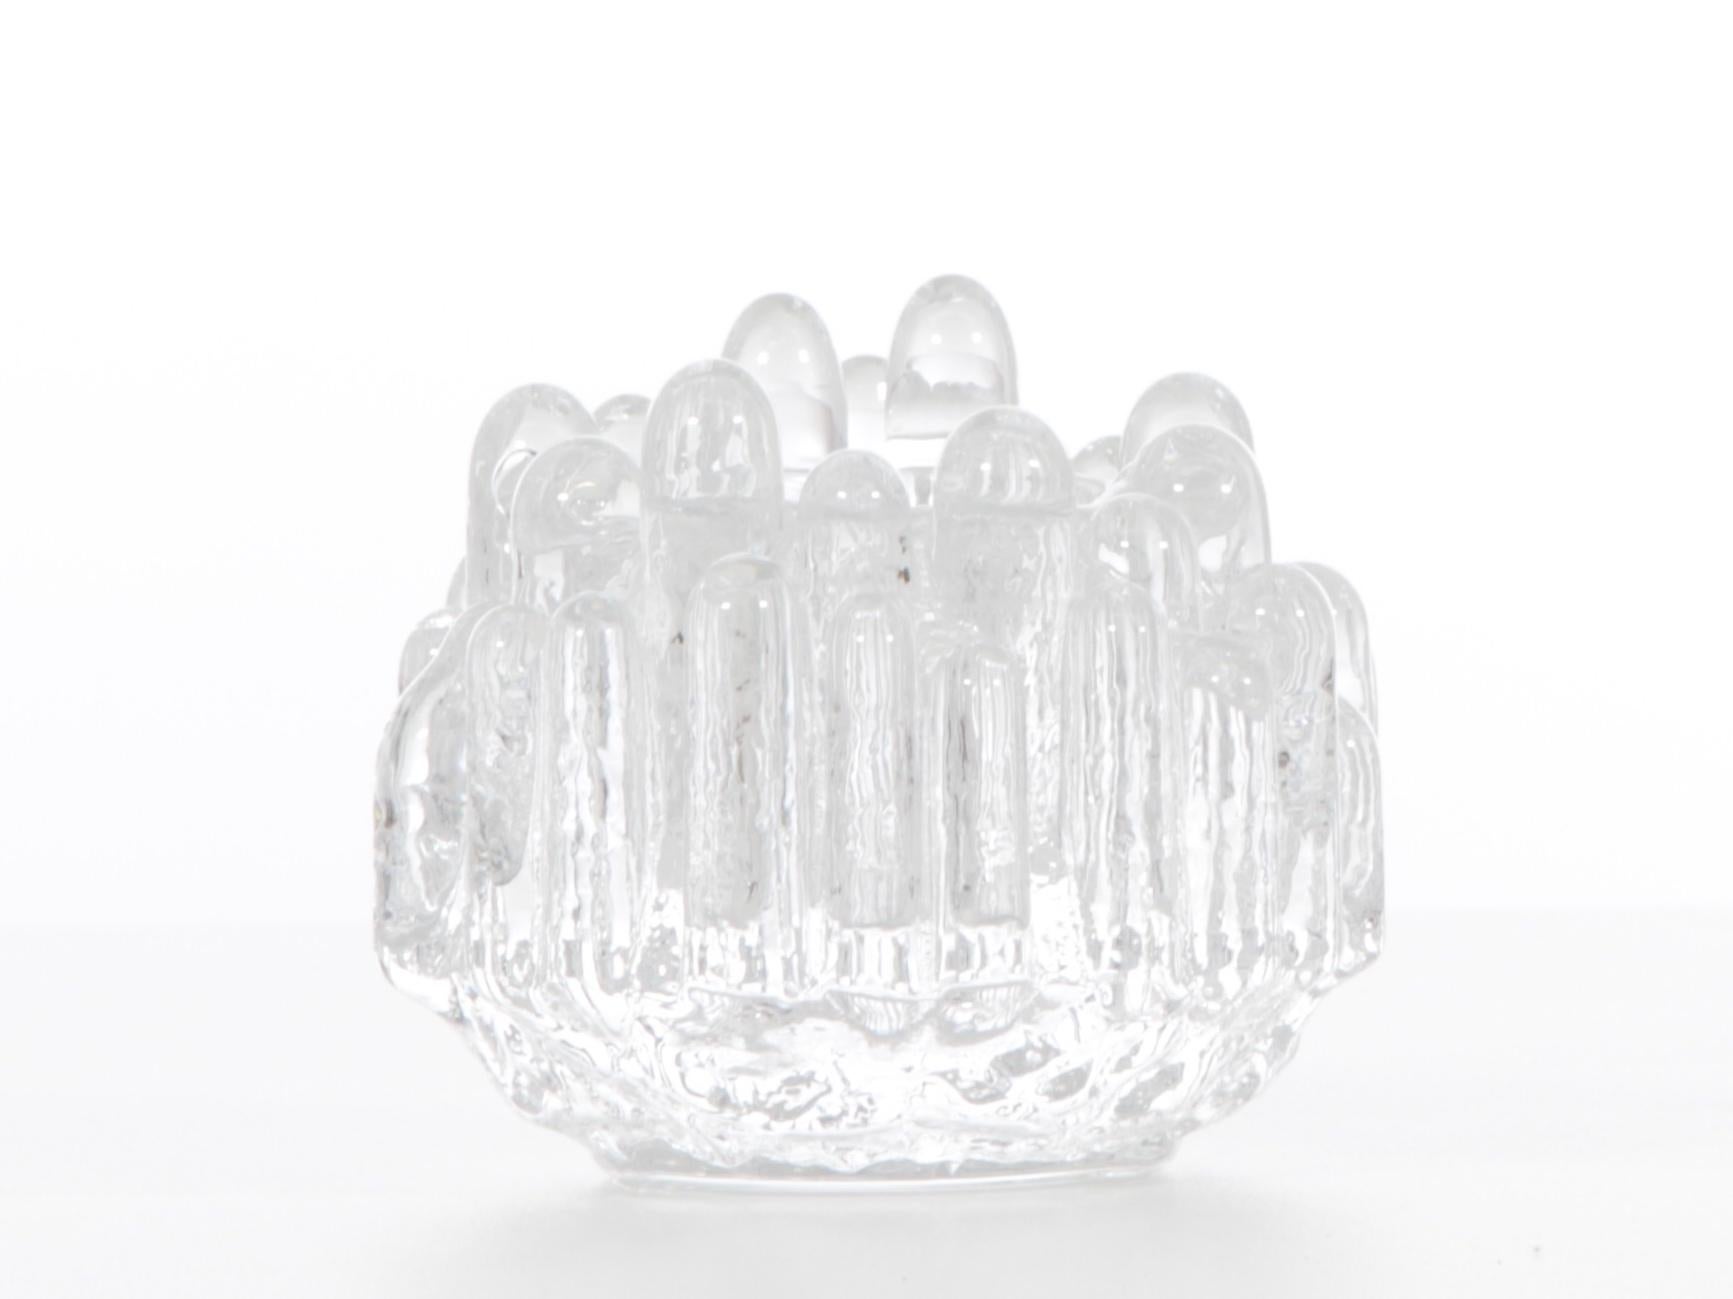 Pair of crystal polar candlesticks by Goran Warff for Costa Boda.

Polar candleholders are a Swedish classic.
When Goran Warff created the Polar collection in the late 1960s at Kosta Boda, he gave his candlesticks a form of ice block playing on